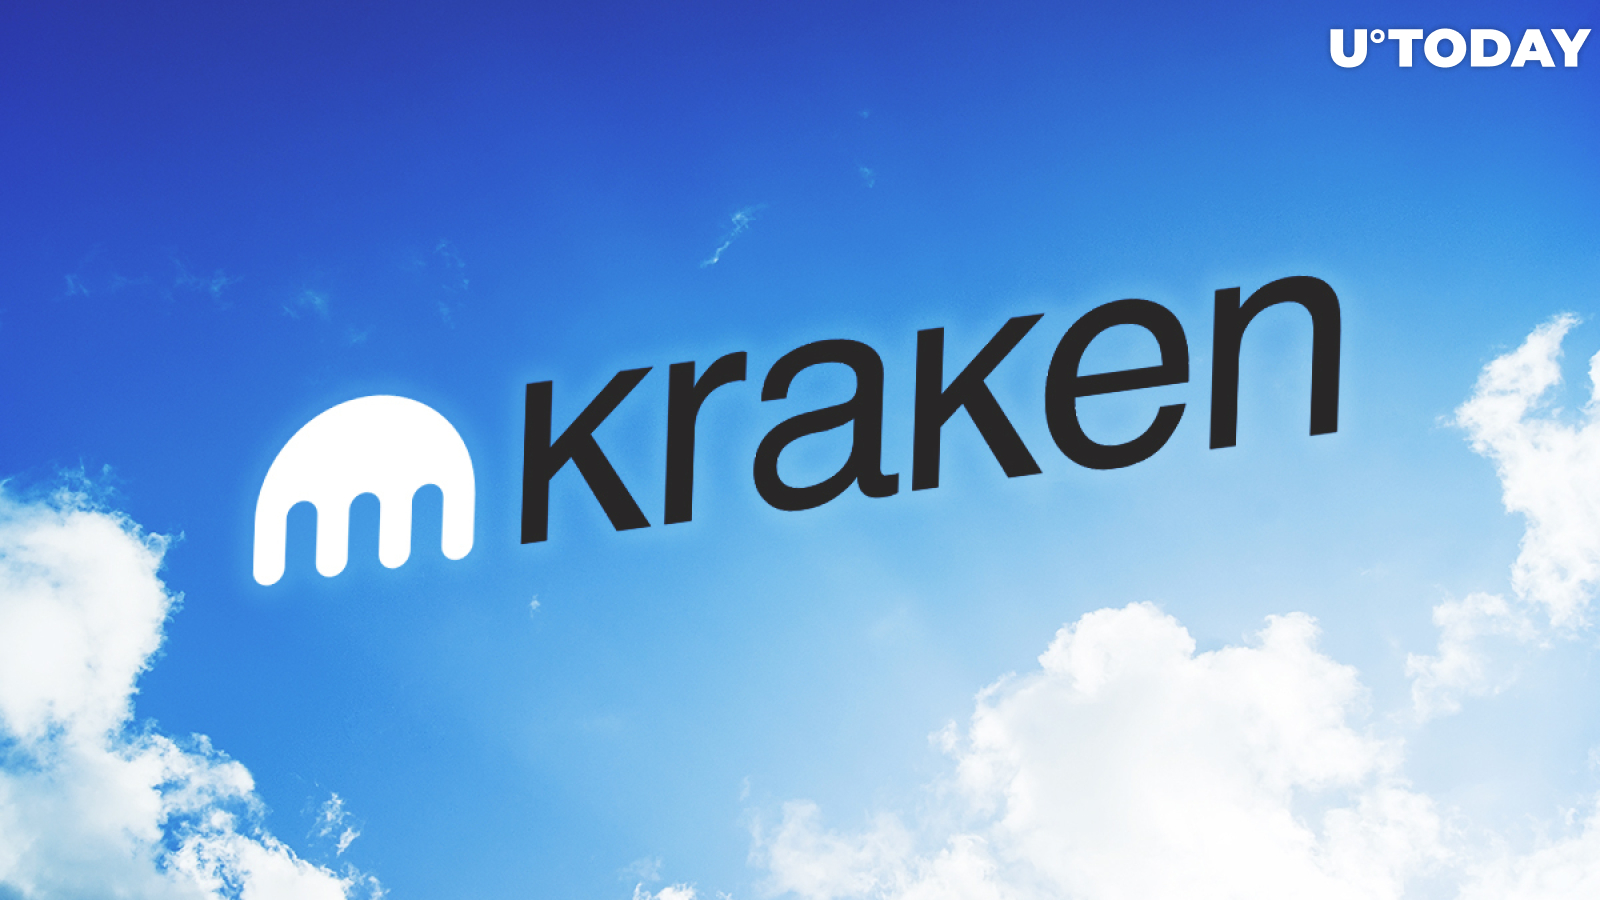 Kraken Makes Limited Time Offer to Buy Its Shares – for Accredited Investors Only